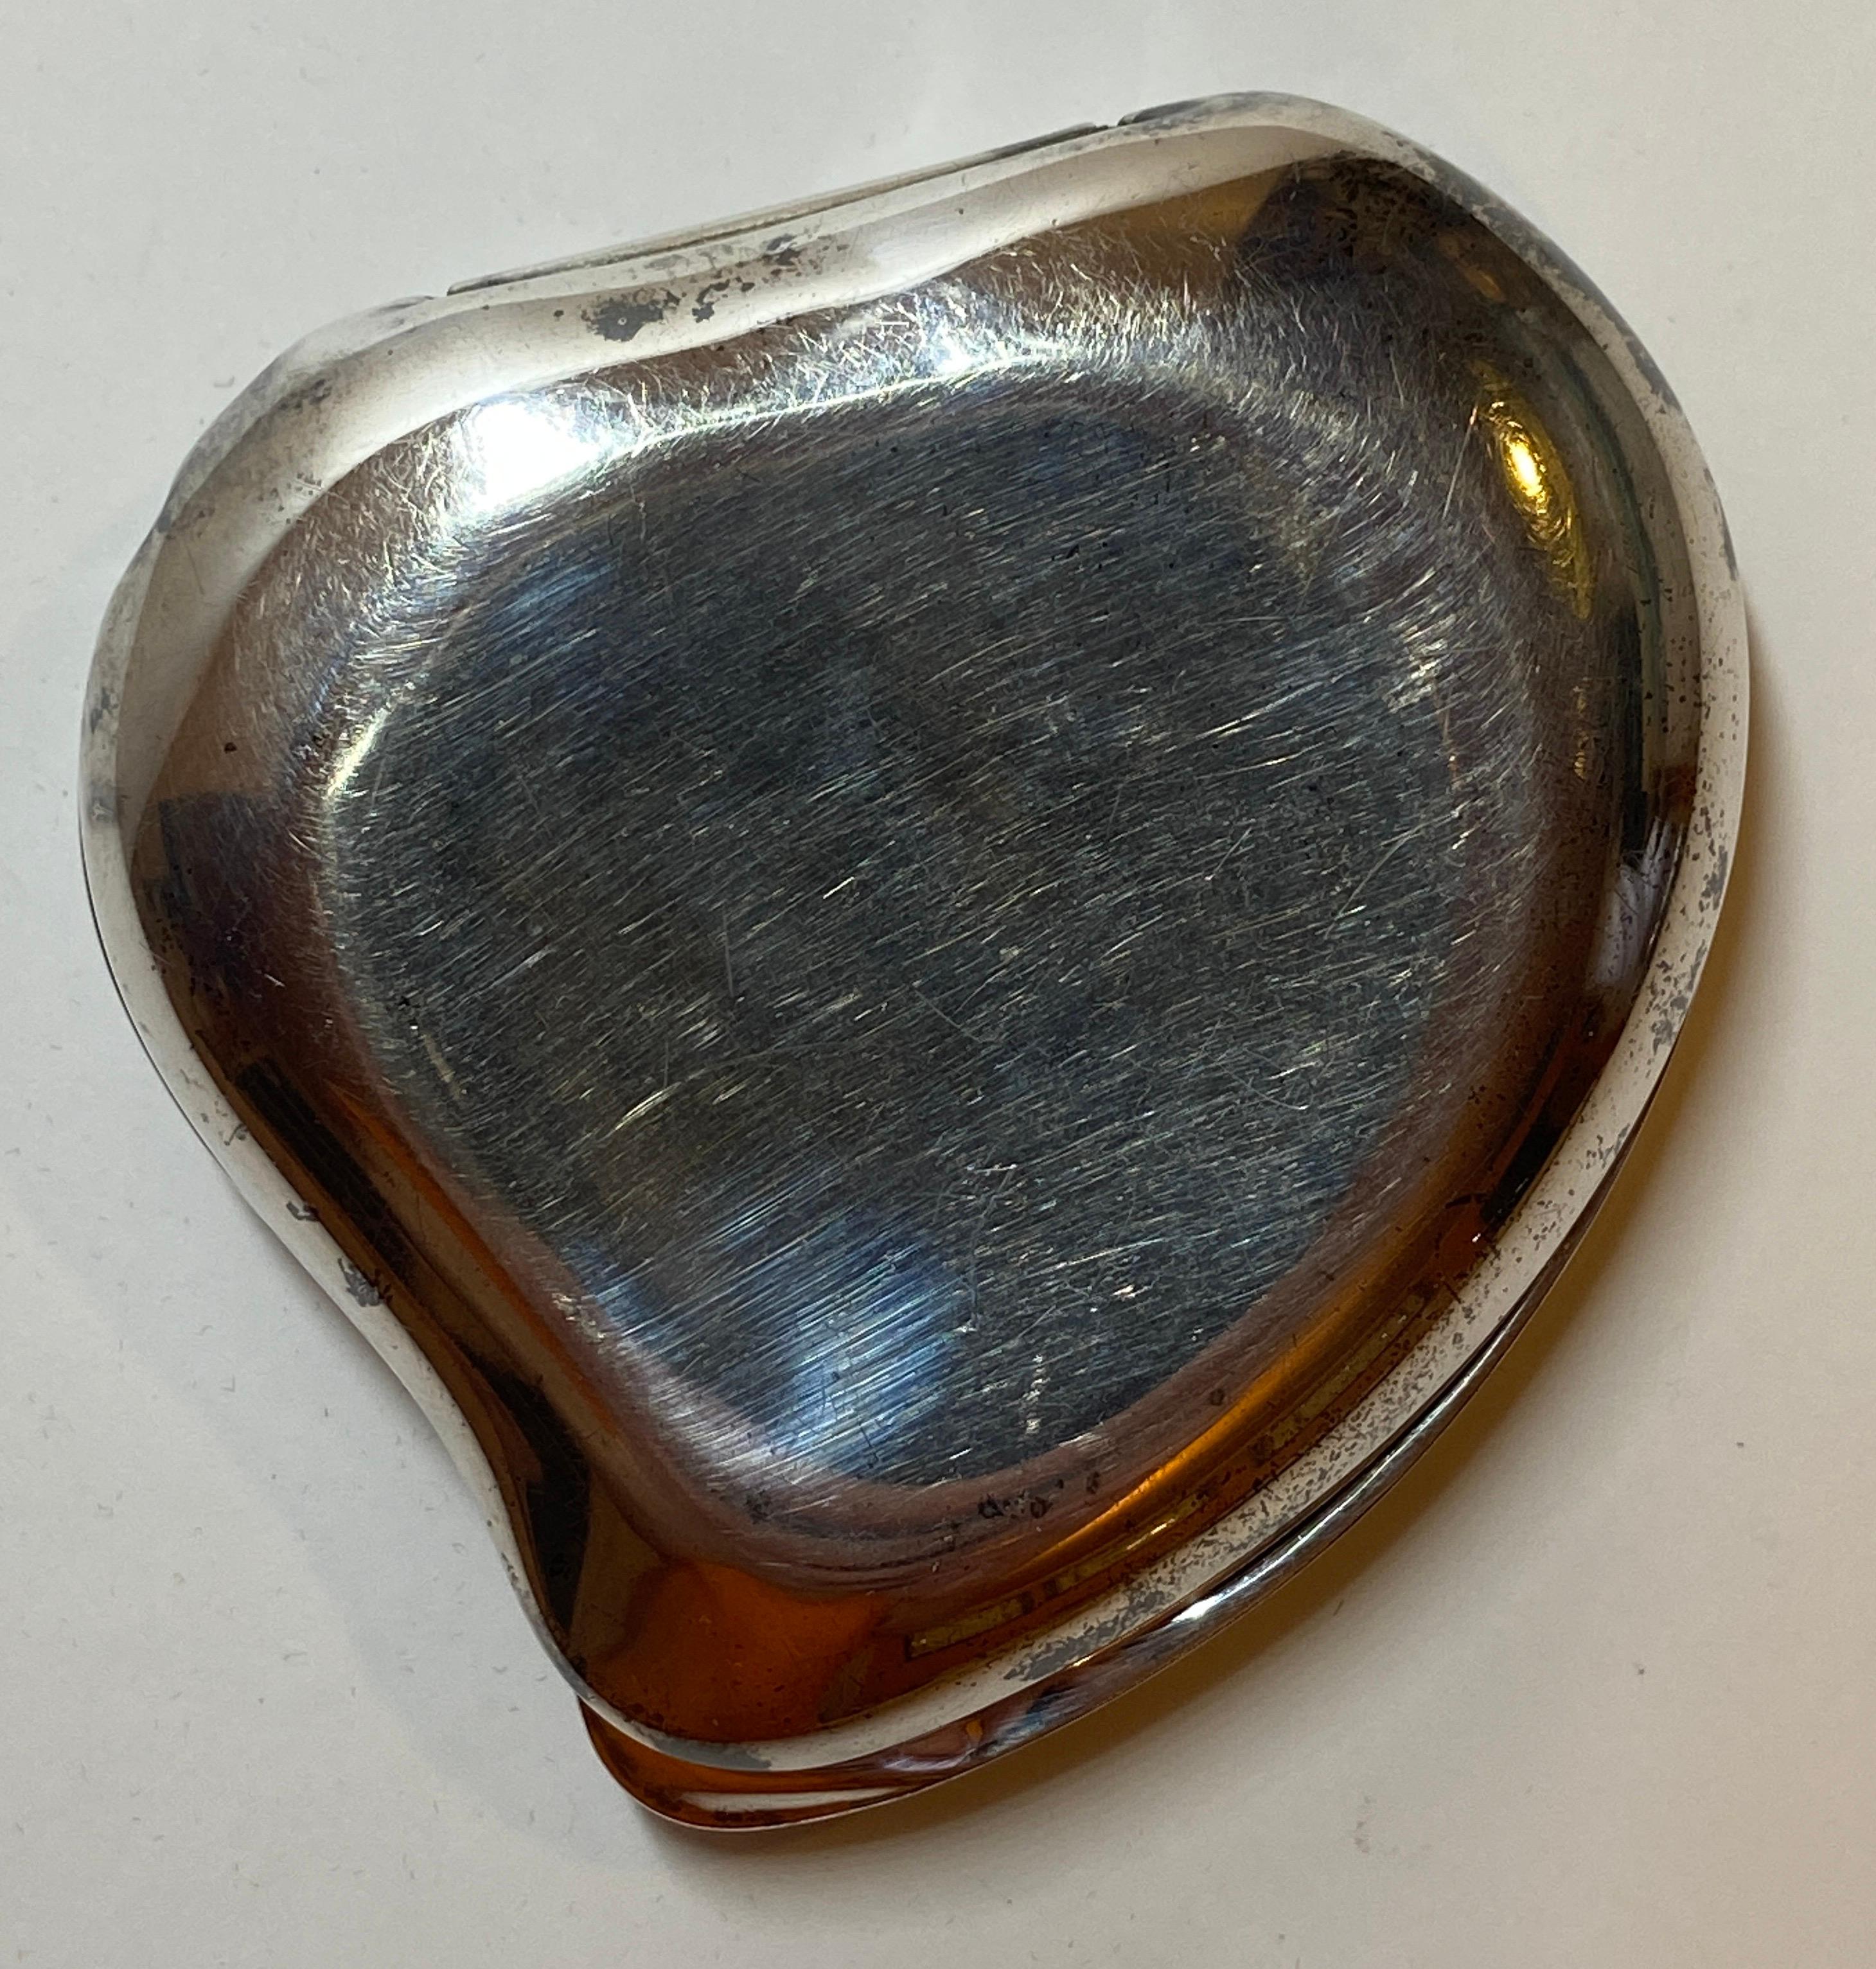 Rare Iconic Signature Halston Sterling Silver Compact Designed by Elsa Peretti In Fair Condition For Sale In New York, NY